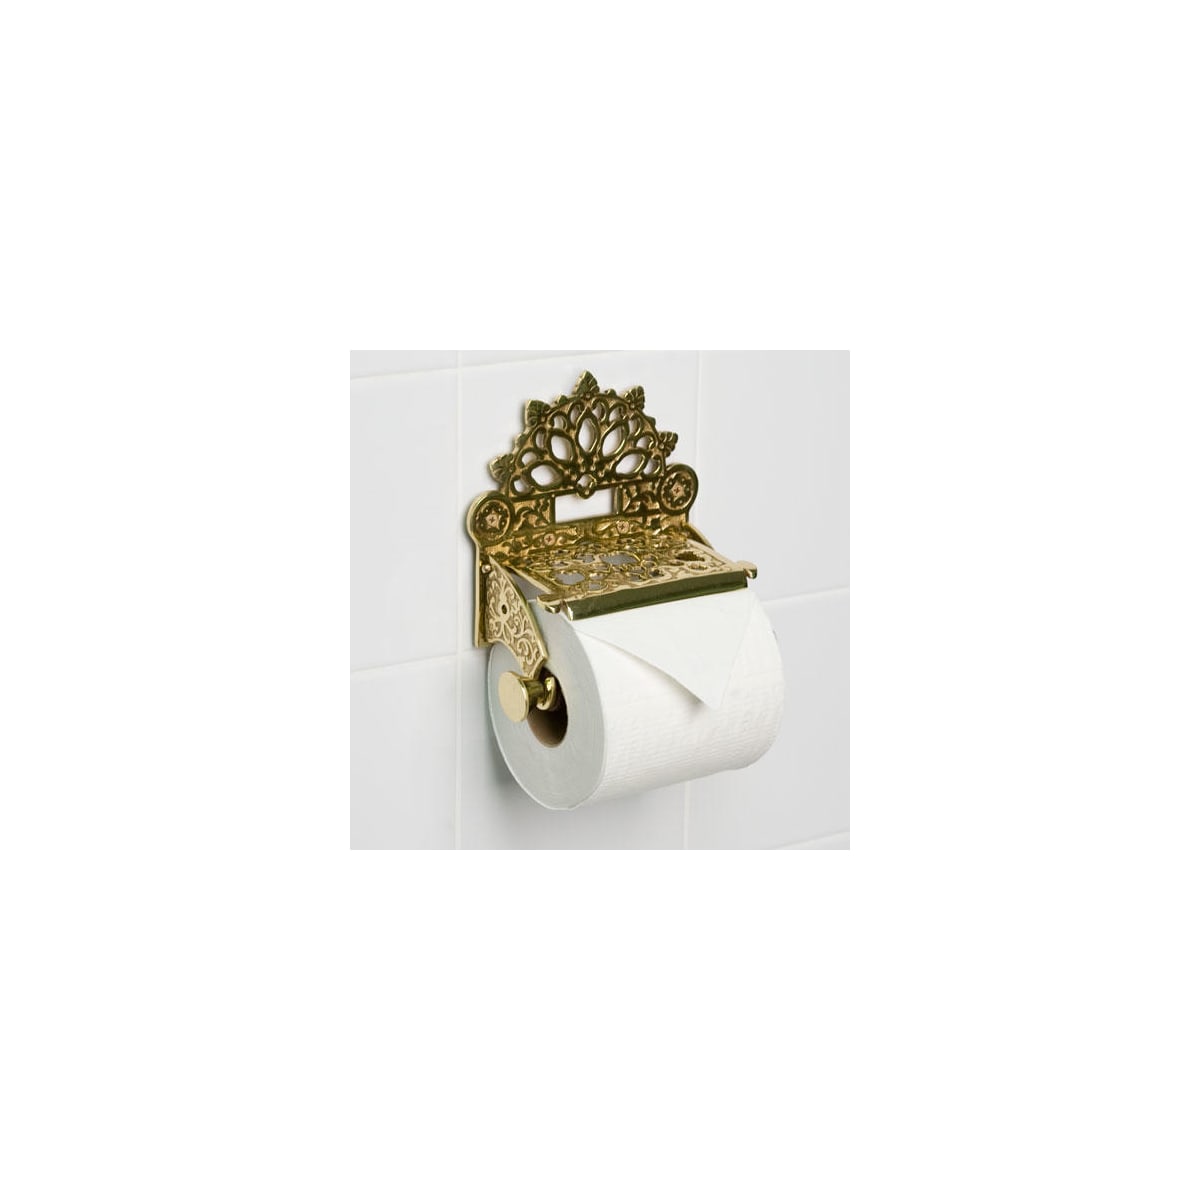 Signature Hardware 296460 Ceeley Collection Wall-Mount Toilet Paper Holder Finish: Polished Brass